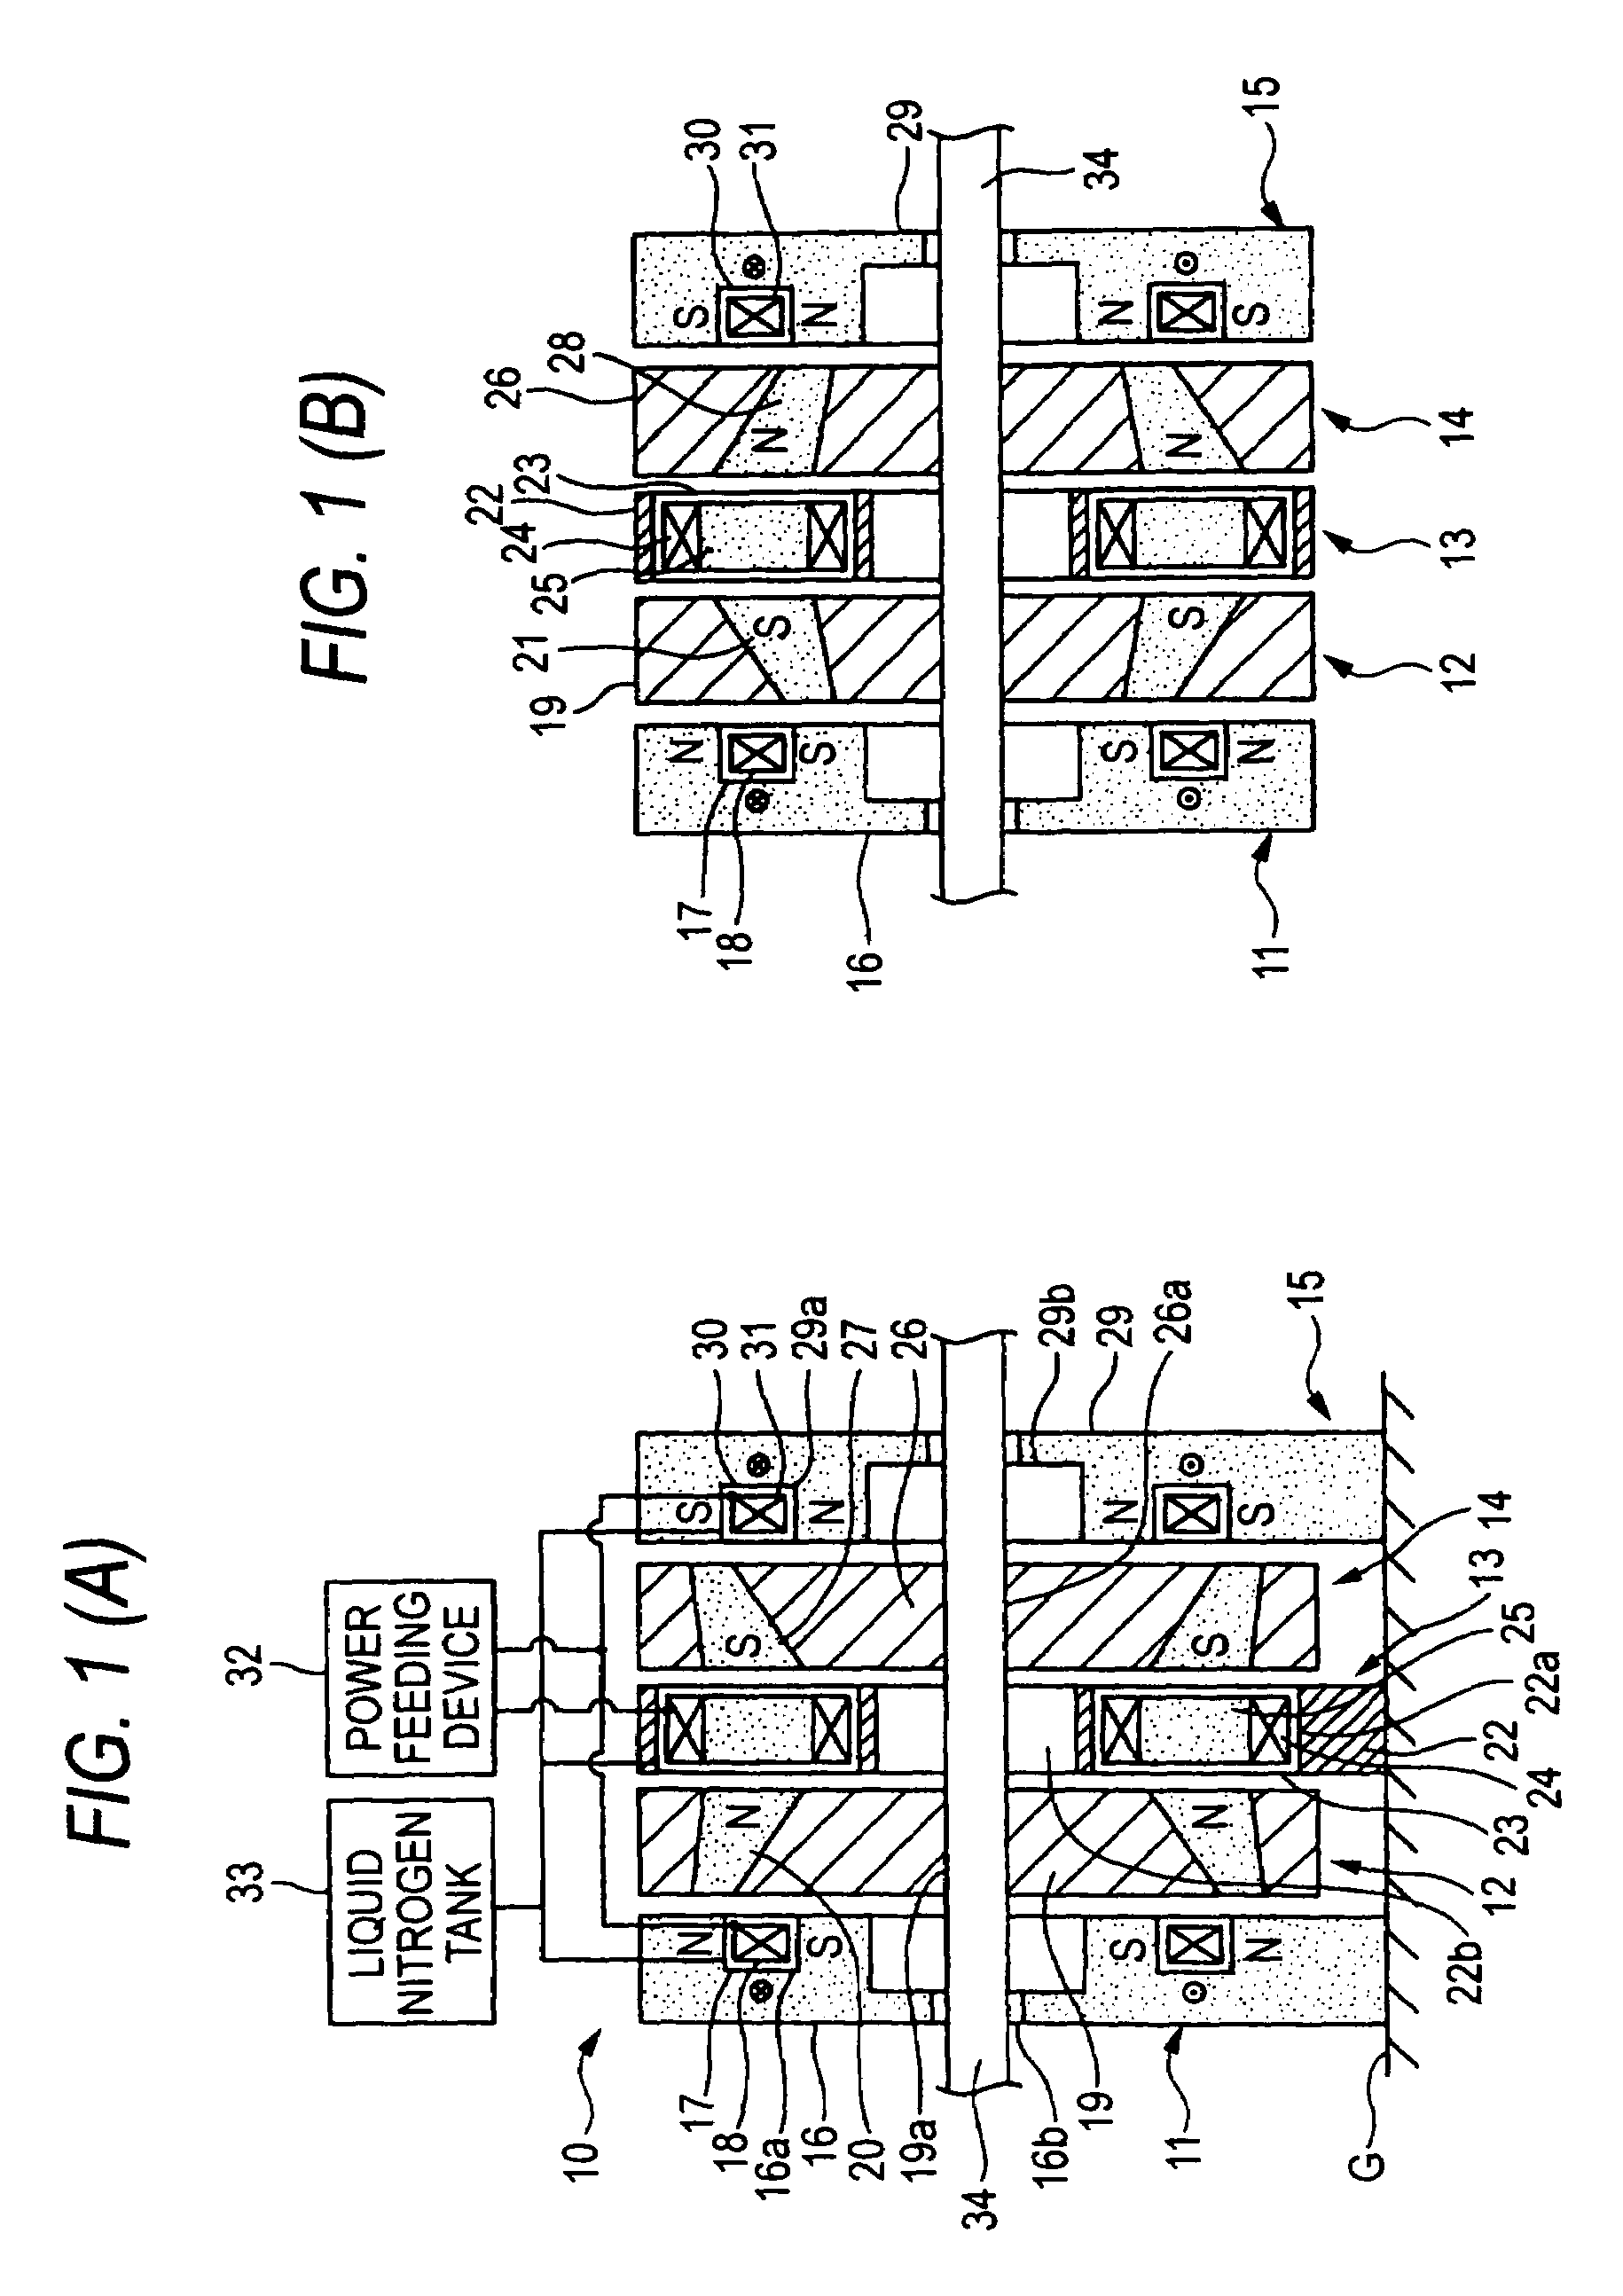 Inductor-type synchronous machine